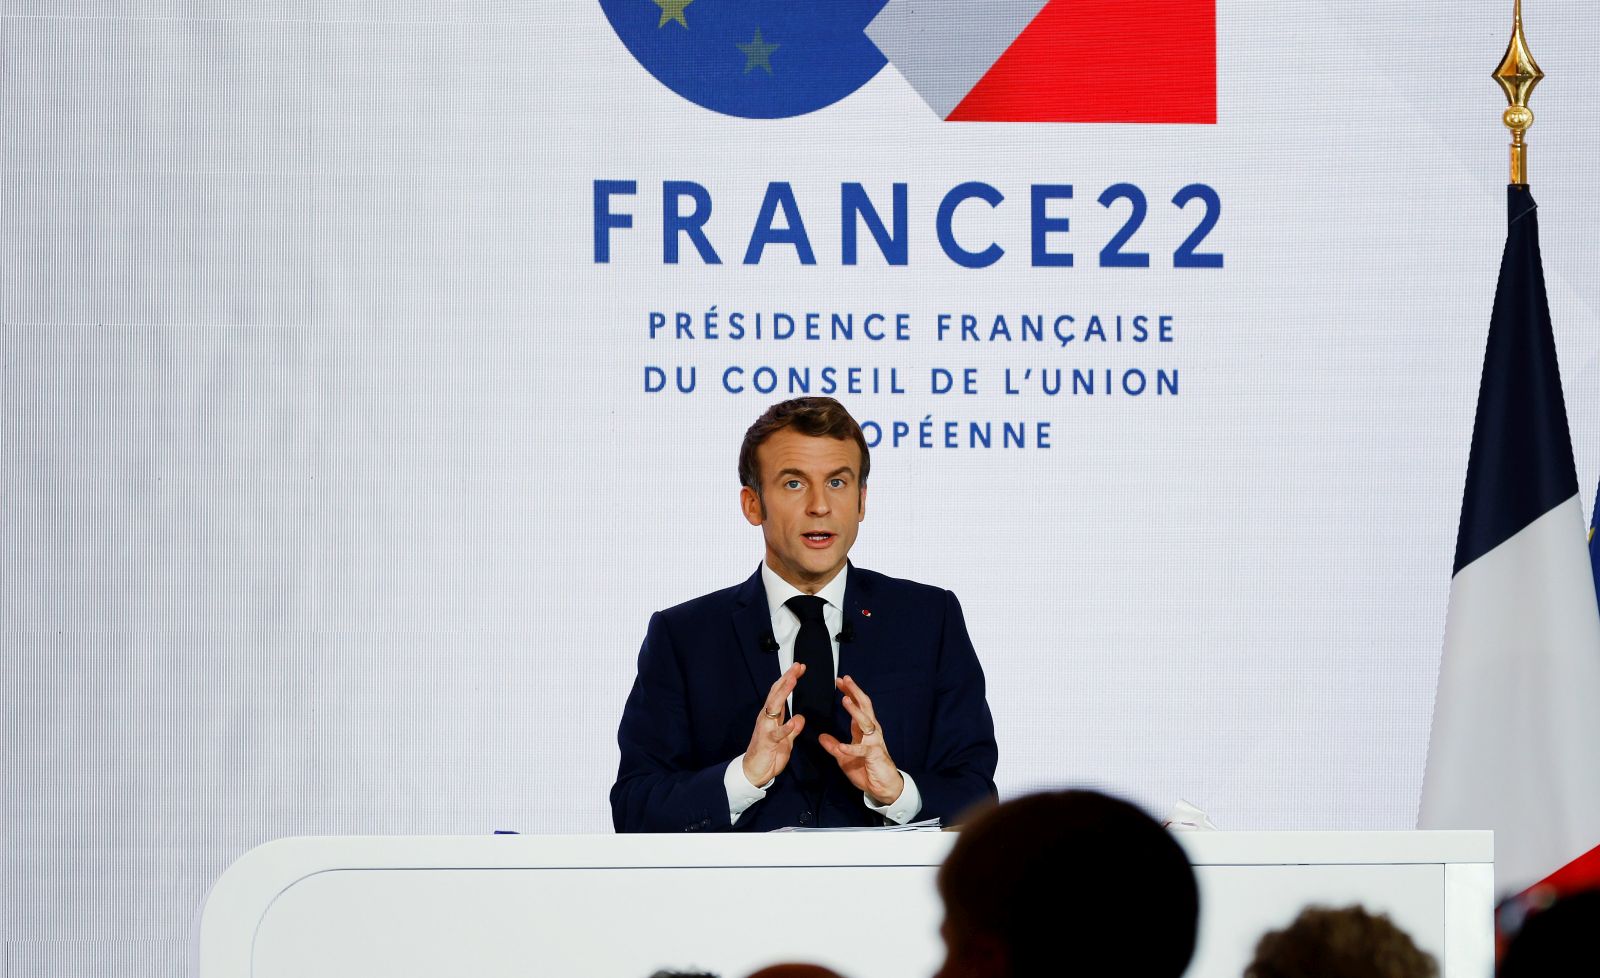 epa09631920 French President Emmanuel Macron delivers a speech during a press conference on France assuming EU presidency, in Paris, France, 09 December 2021. France is set to assume the Presidency of the Council of the European Union starting January 2022.  EPA/LUDOVIC MARIN / POOL  MAXPPP OUT